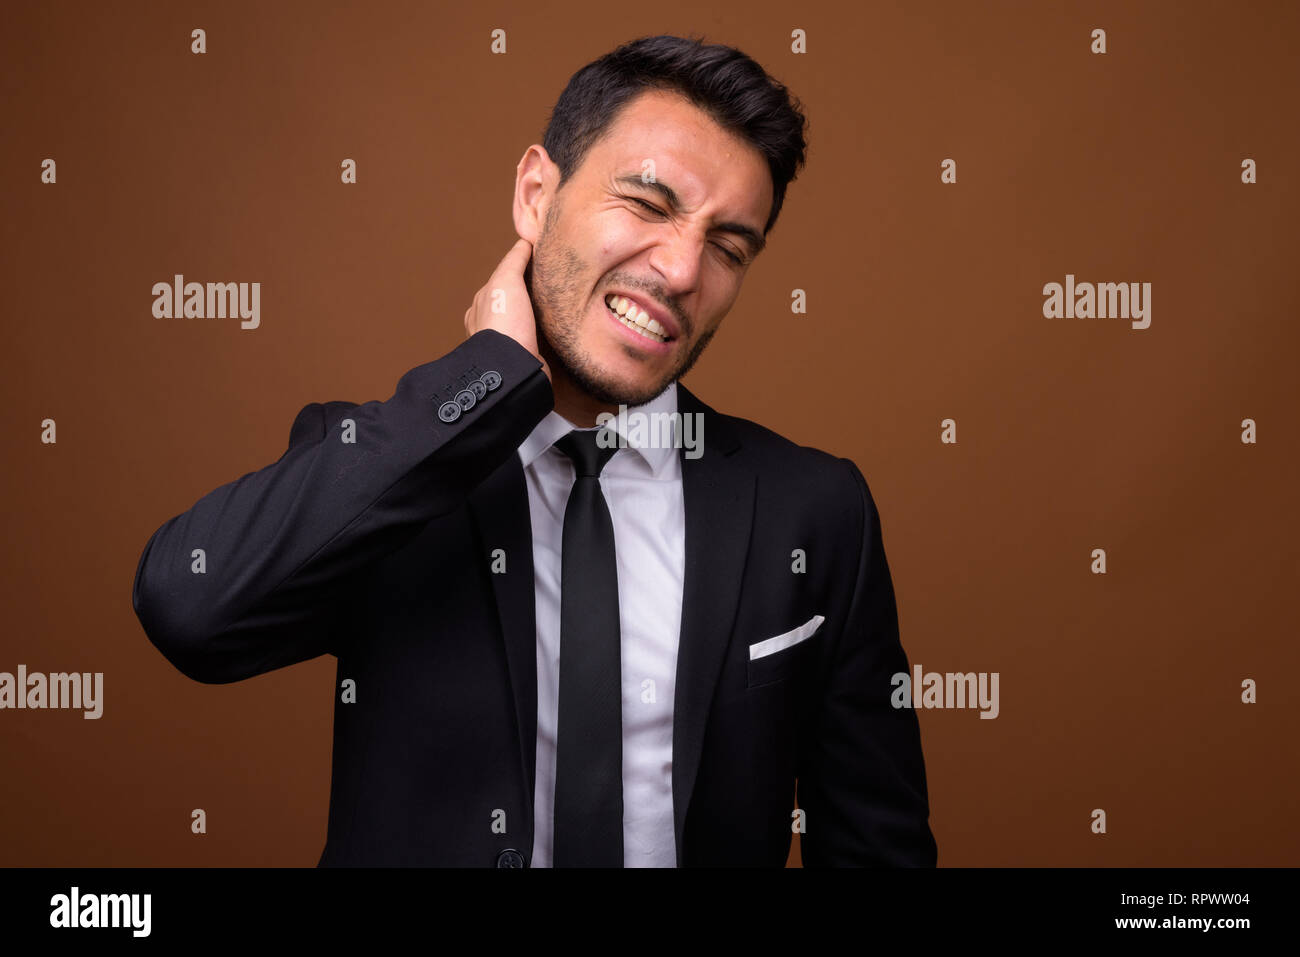 Young handsome Hispanic businessman against brown background Stock Photo